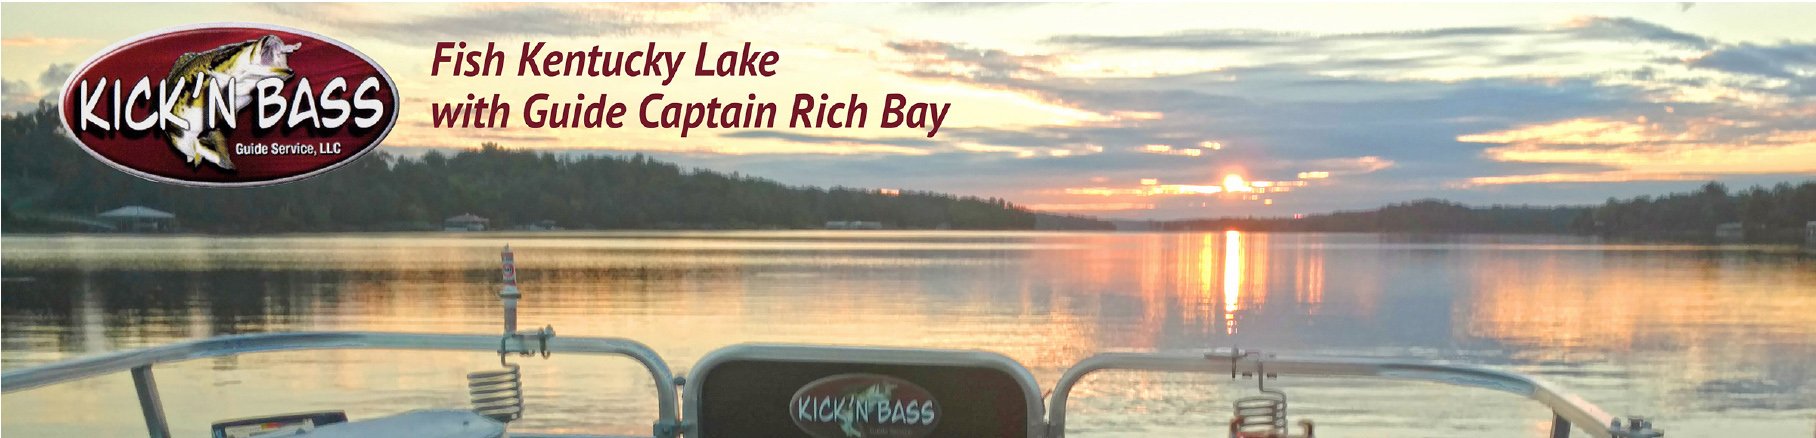 Your Kick'n Bass Fishing Report for May 2, 2018